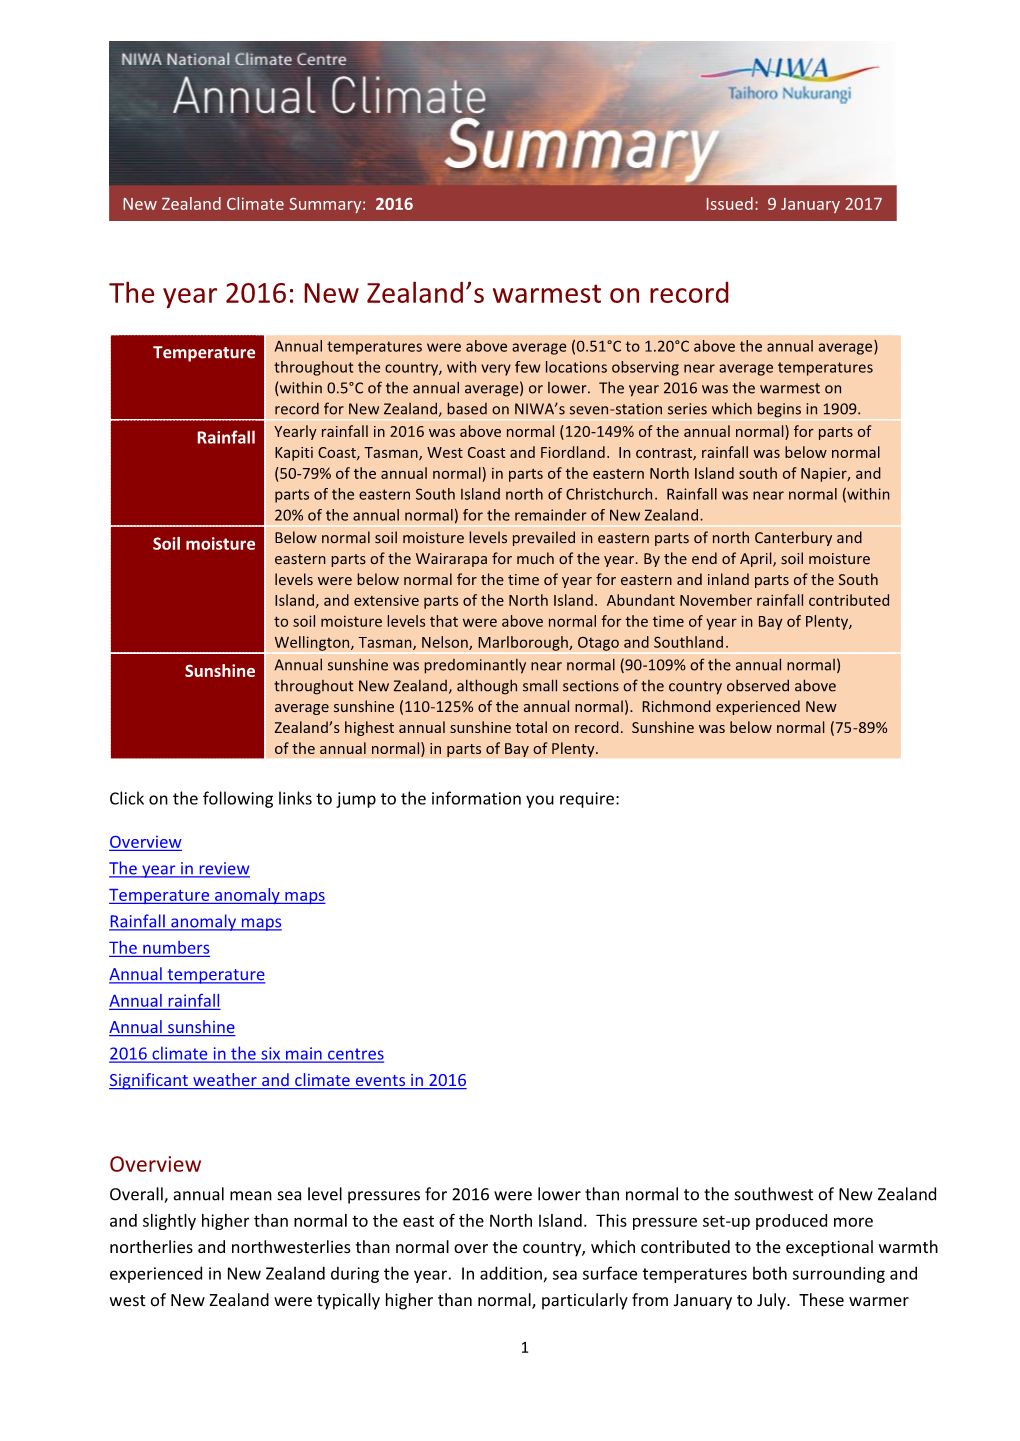 Download the 2016 New Zealand Annual Climate Summary